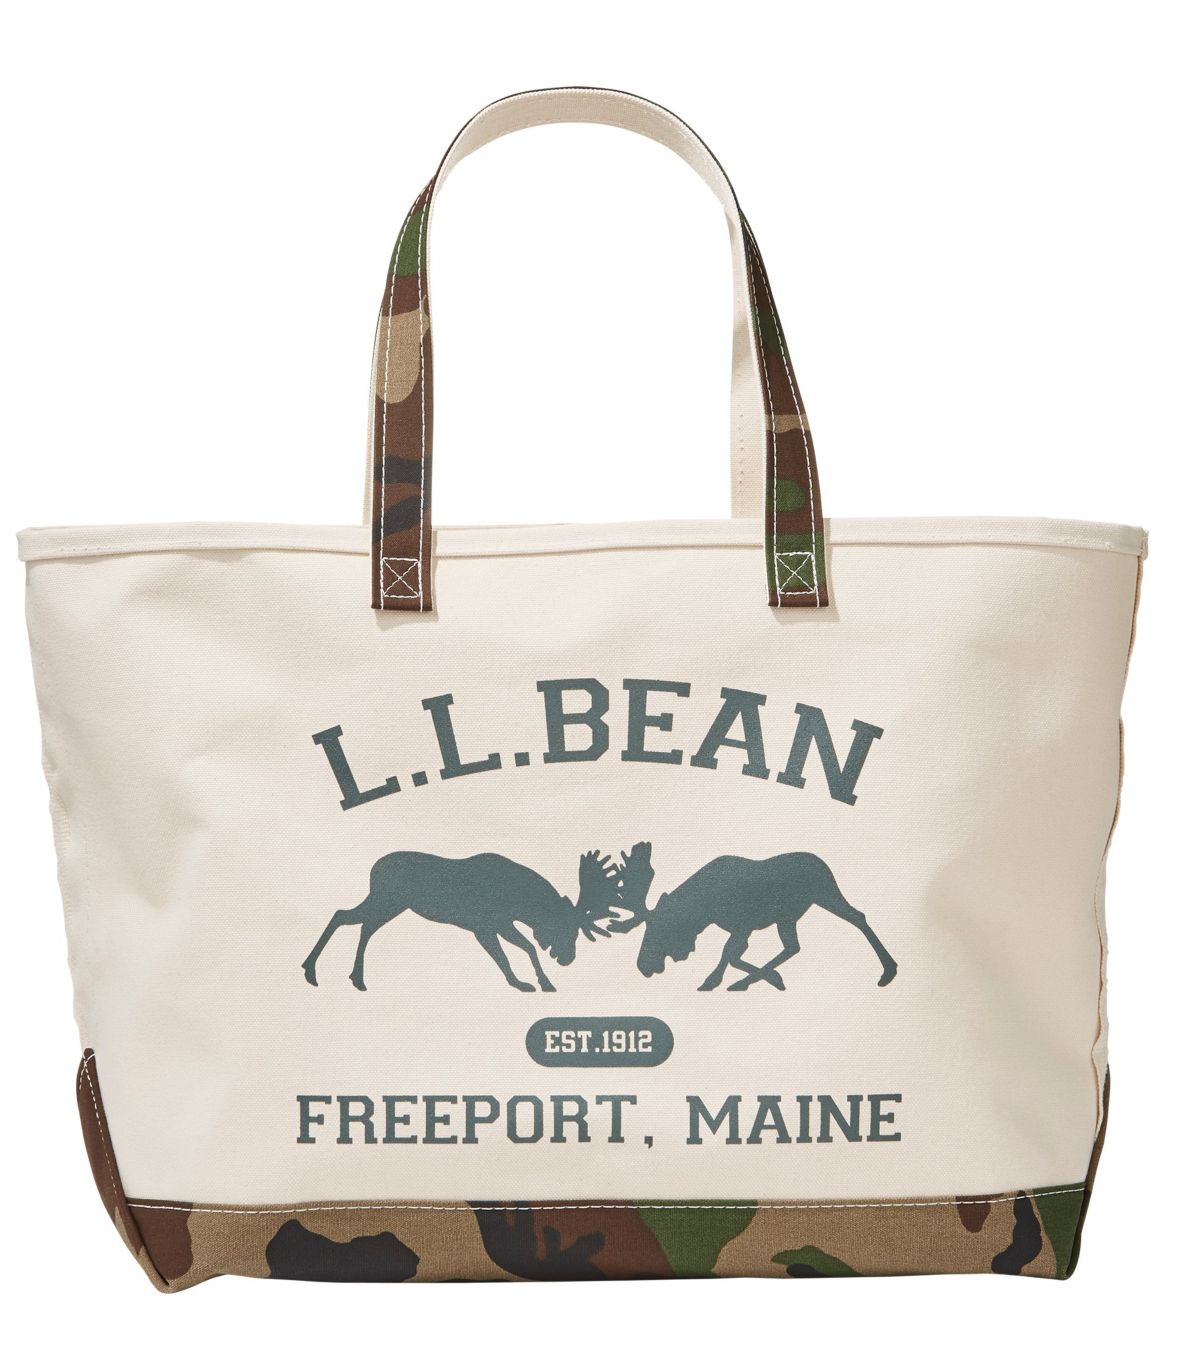 Graphic Boat and Tote, Large